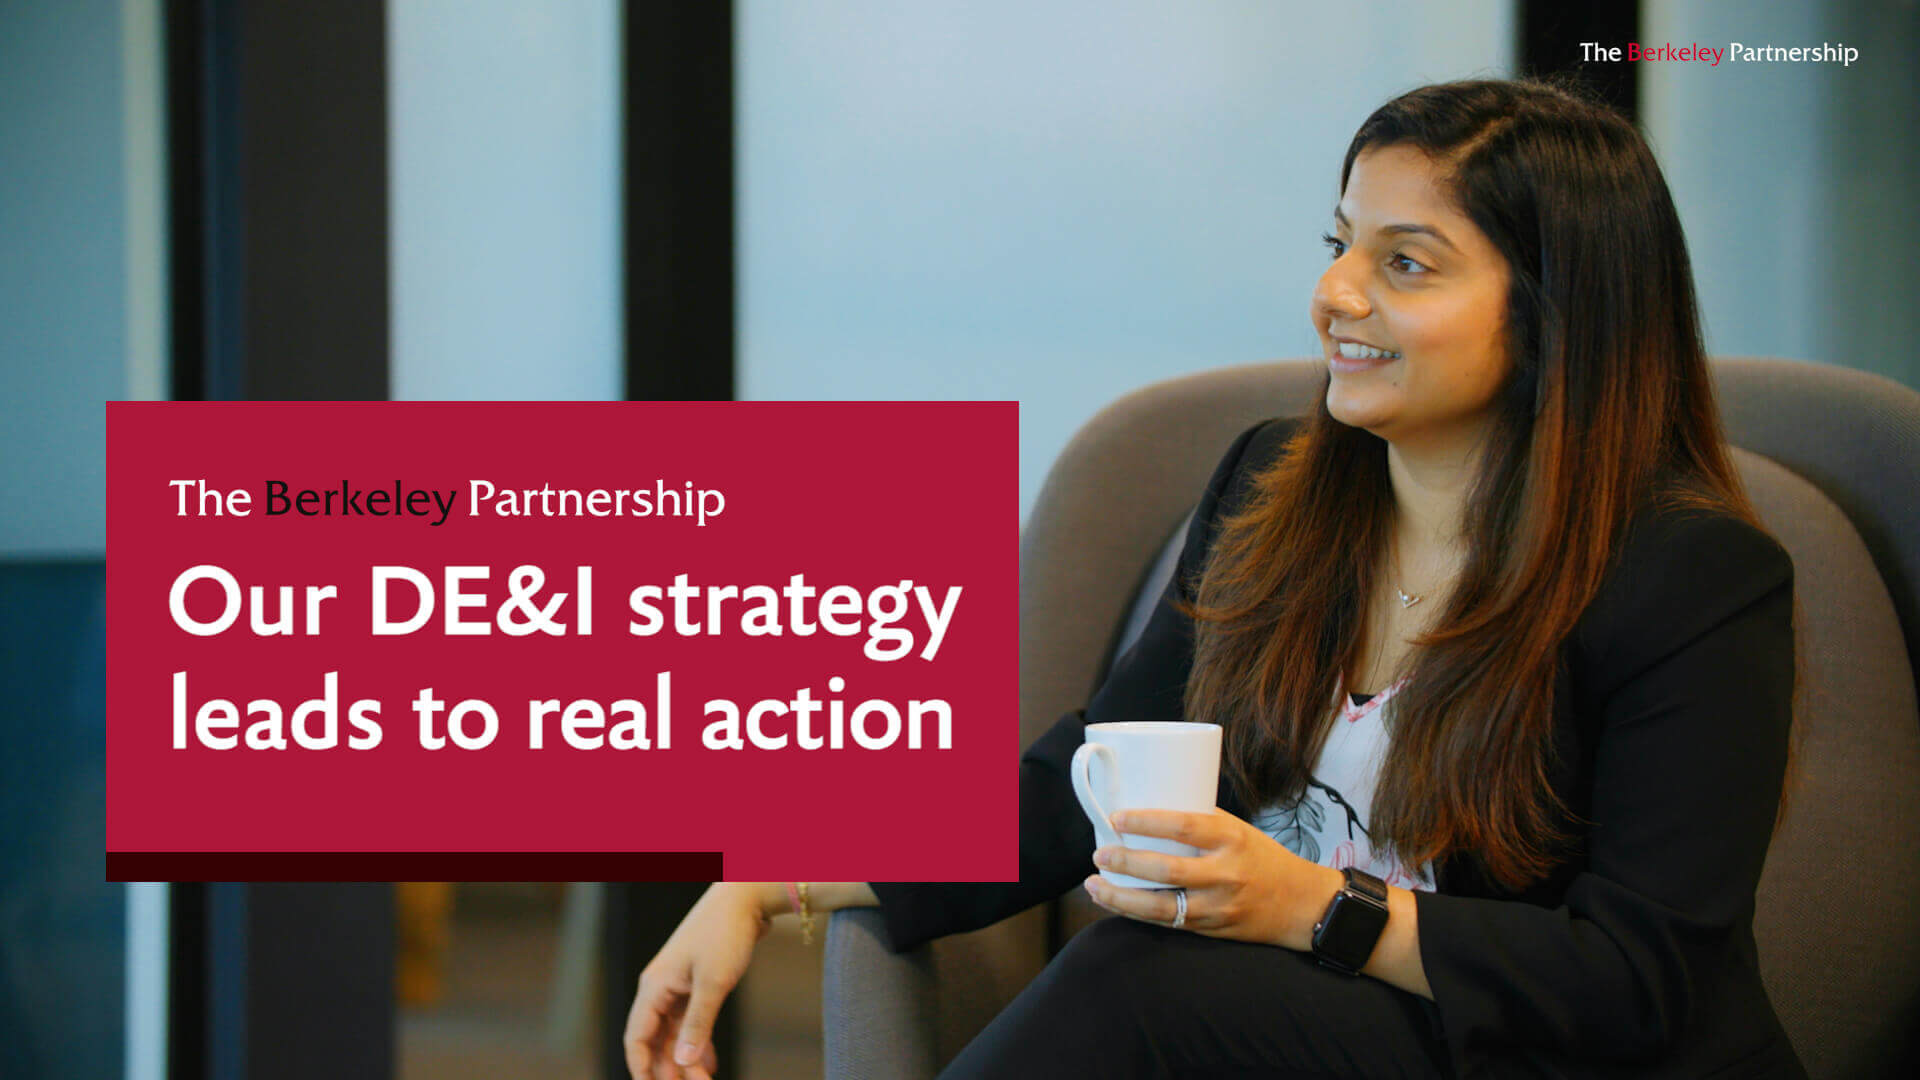 An on-screen banner says 'Our DE&I strategy leads to real action'. In the background, a Berkeley consultant is sitting down, holding a cup of coffee.